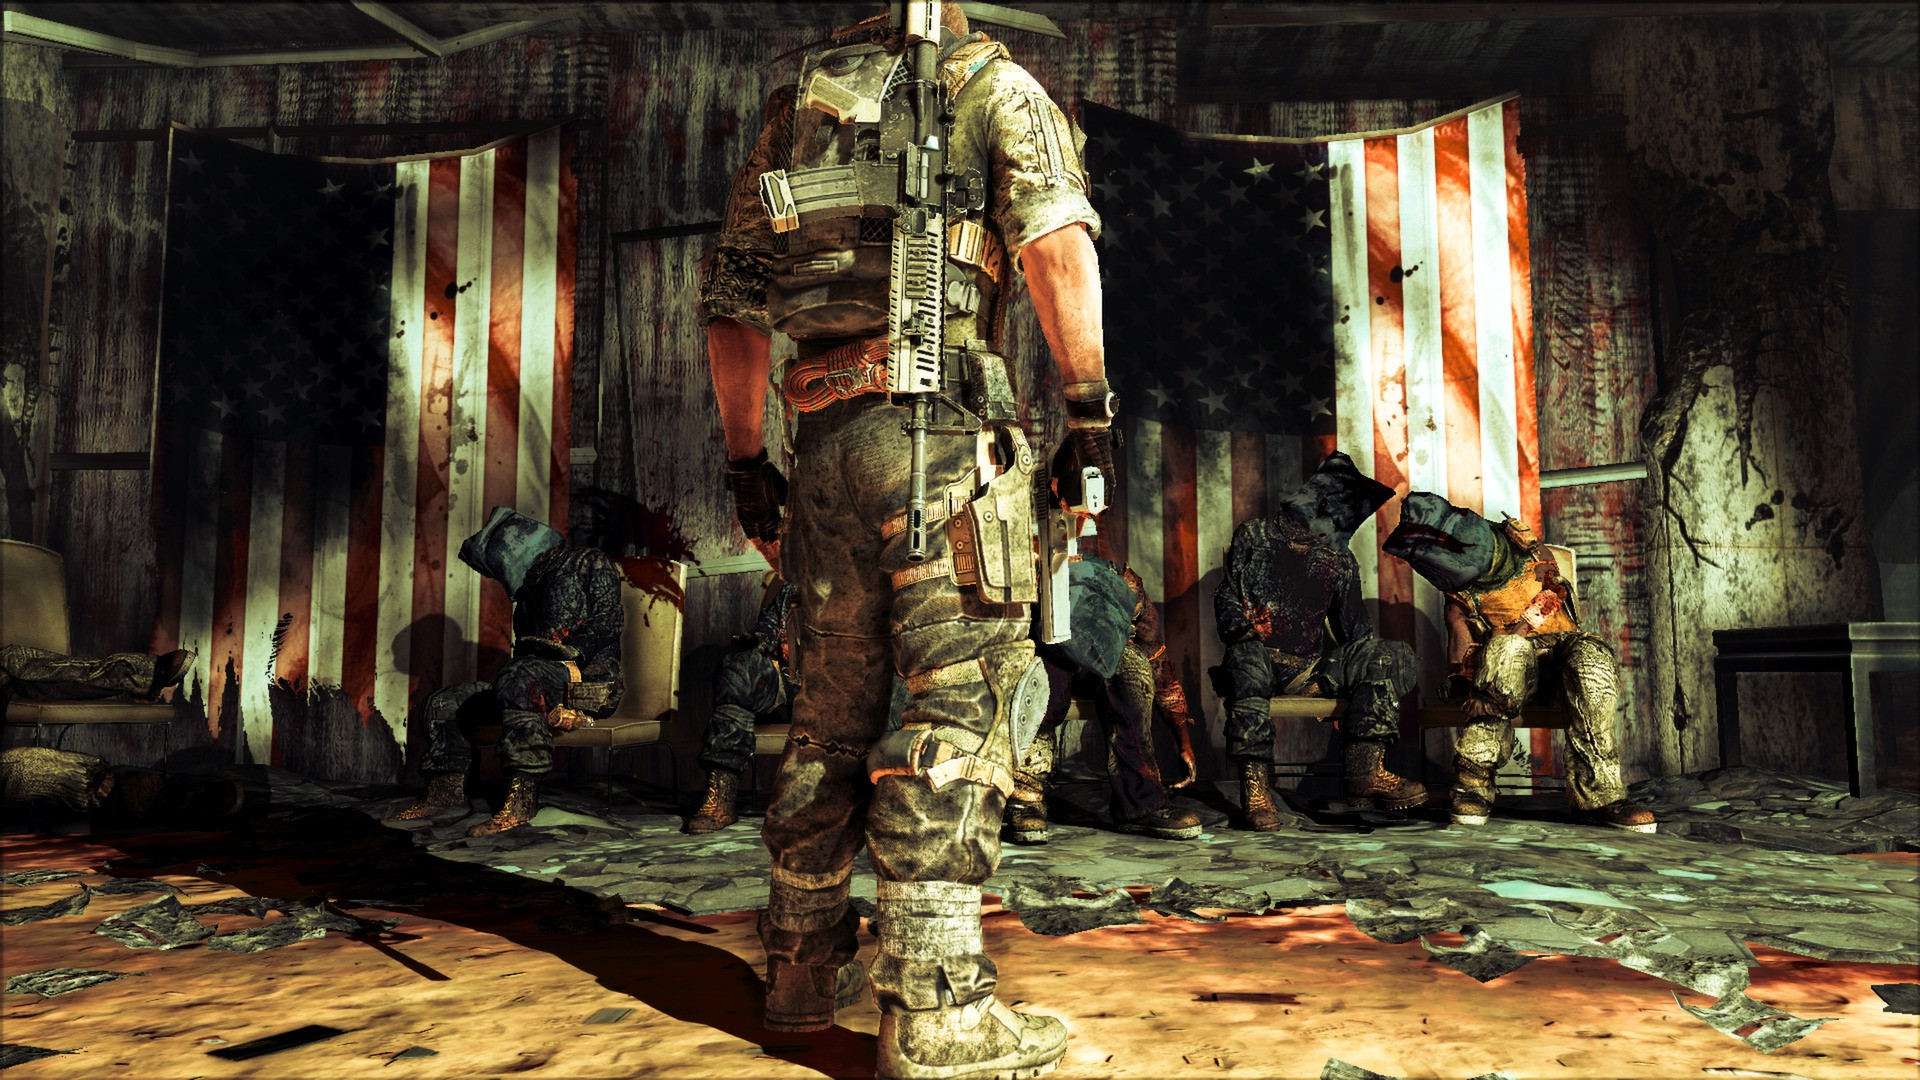 A row of black-hooded prisoners sit dead, their arms tied behind their backs to their chairs, before bloody and torn American flags in a grim scene from Spec Ops The Line